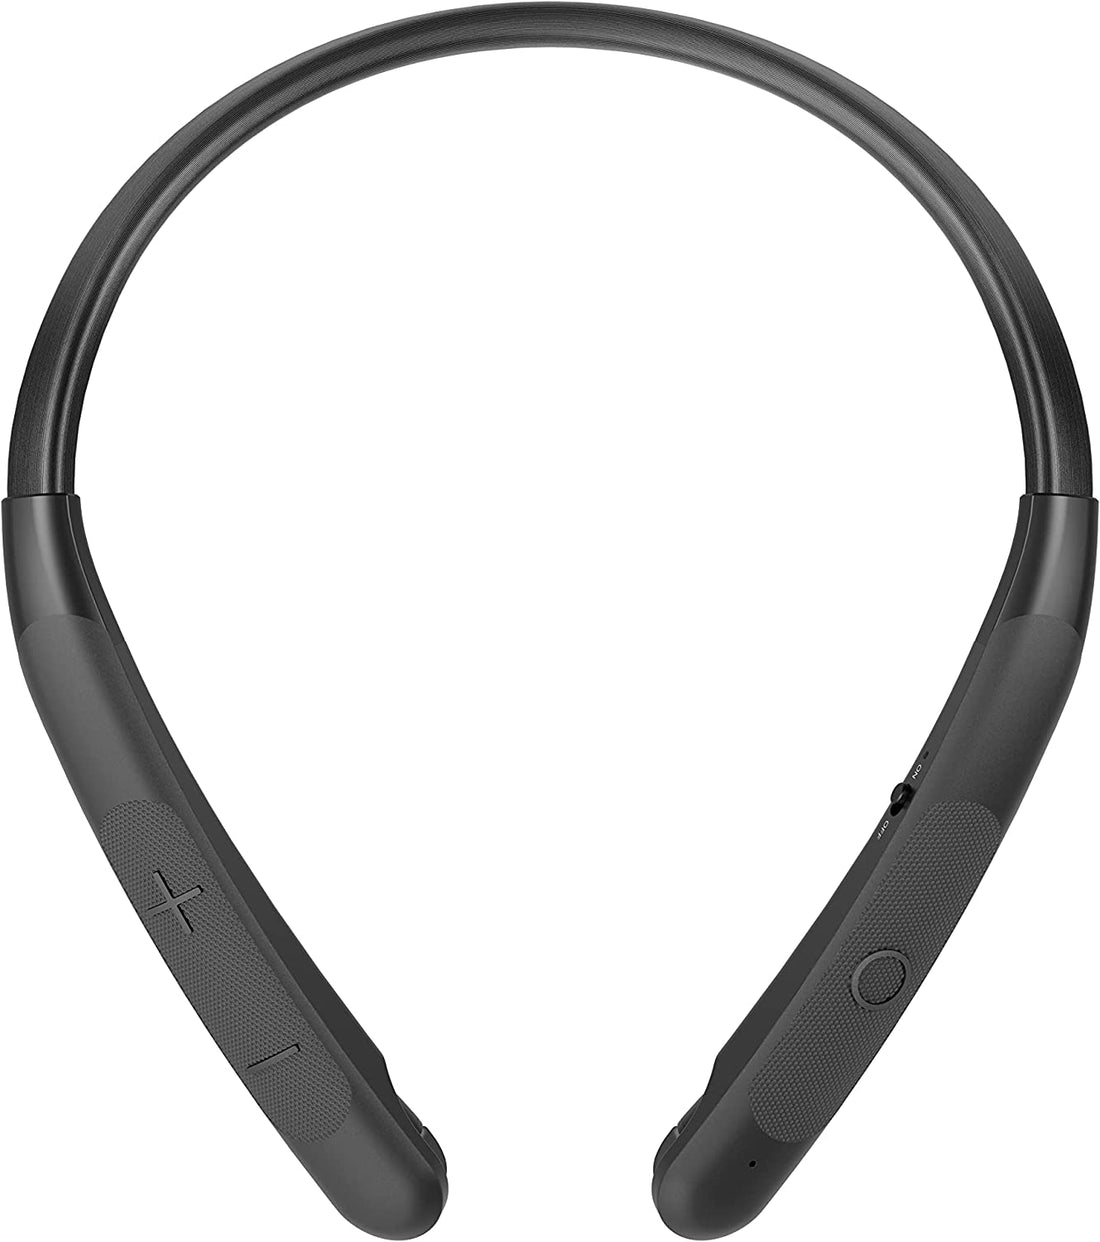 LG TONE NP3 Wireless Stereo Headset with Retractable Earbuds, Black (Certified Refurbished)